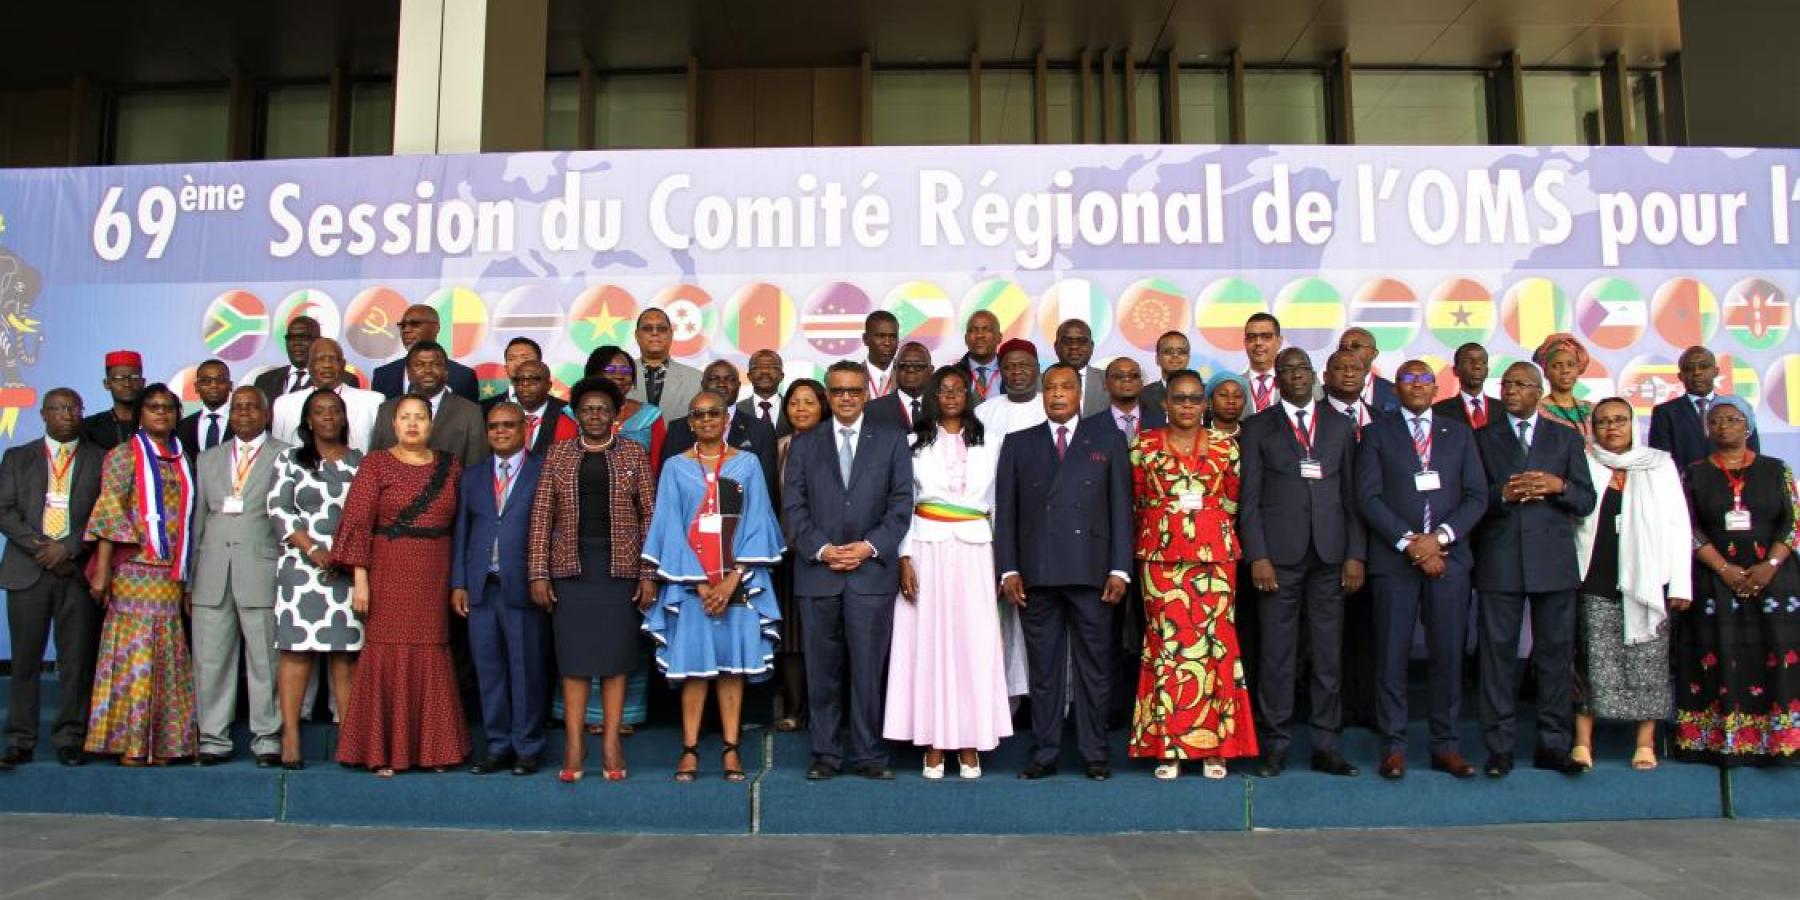 69th session of the WHO Regional Committee for Africa © WHO AFRO